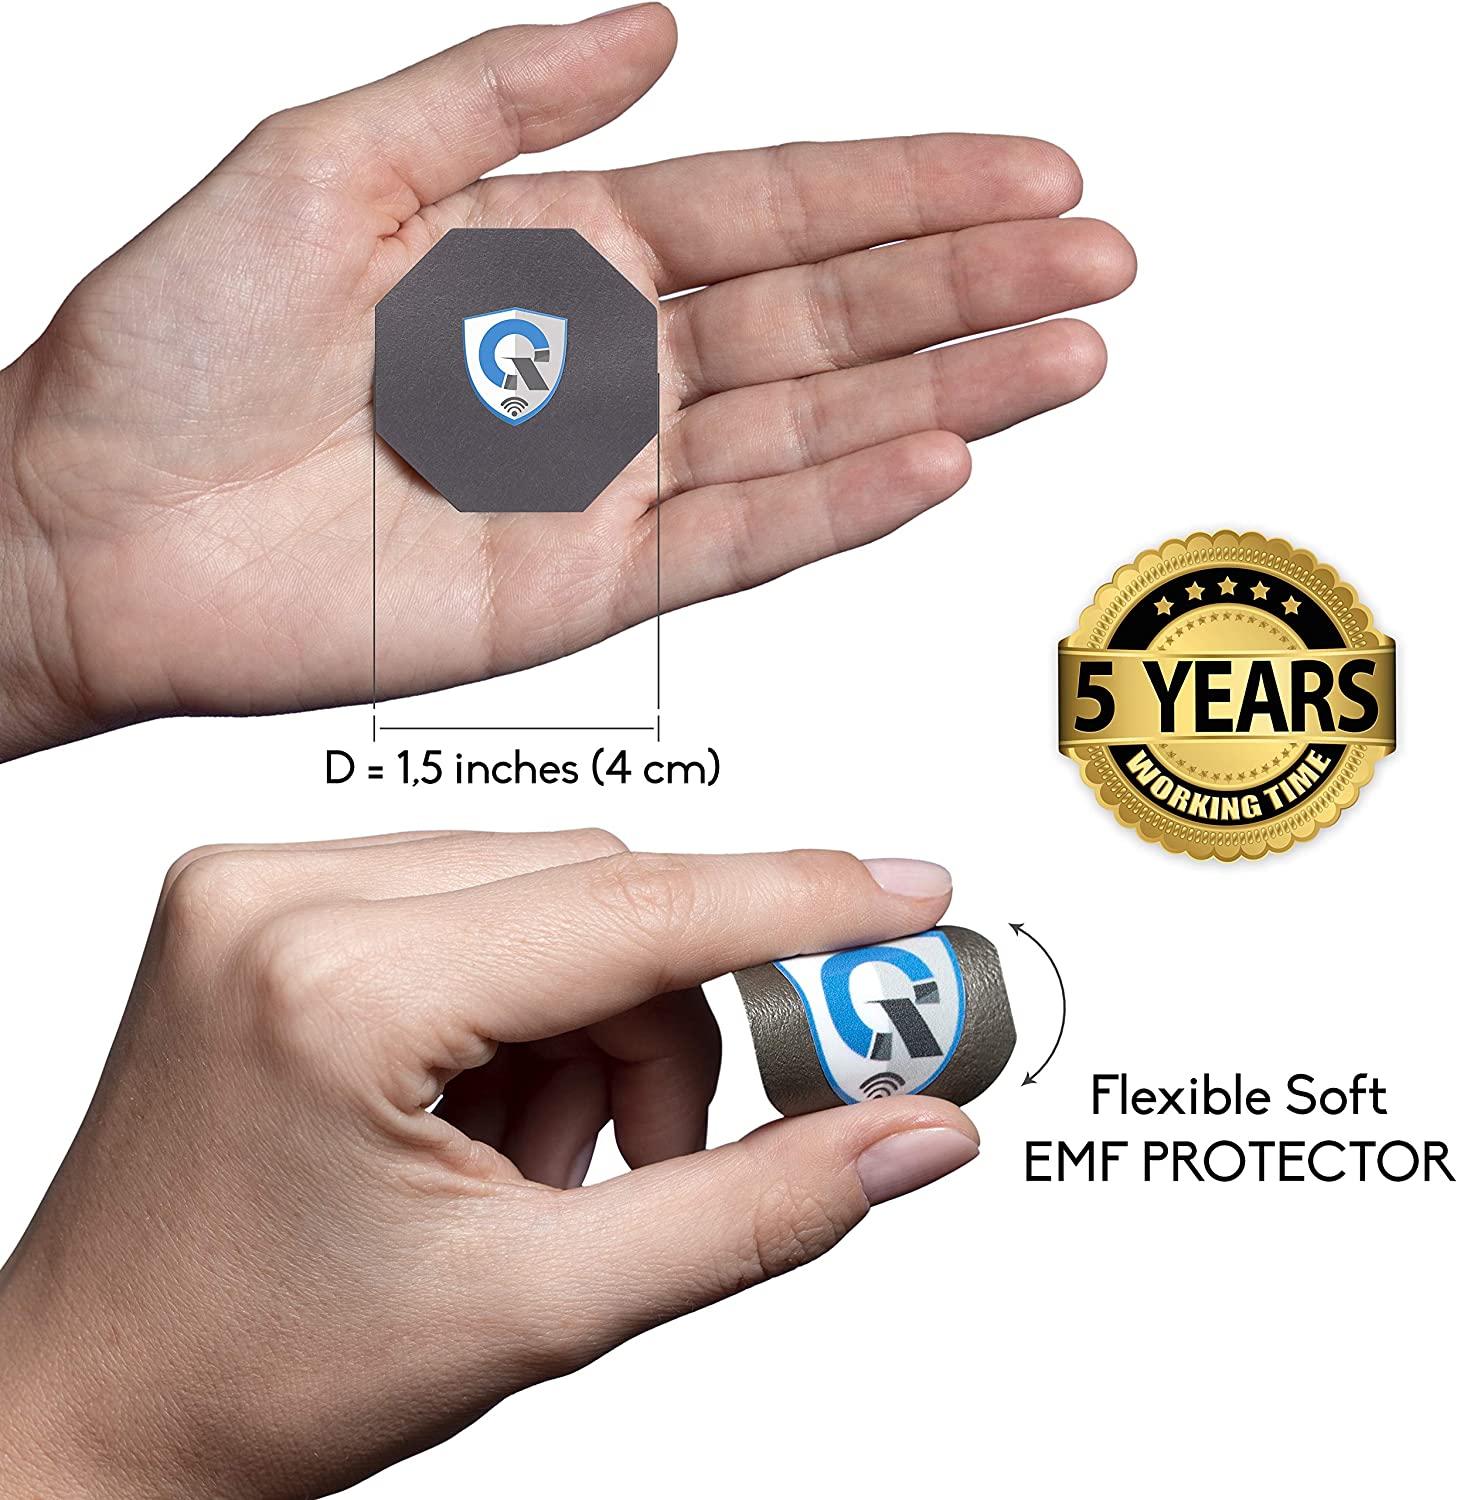 EMF Protection Tesla Technology Emf Protector. Geopathic Stress Zone  Protection no matter where you are. GOLD International AWARD as EMF  Exposure Protection EMF Shield. EMF Blocker 1.5 IN NEW Version